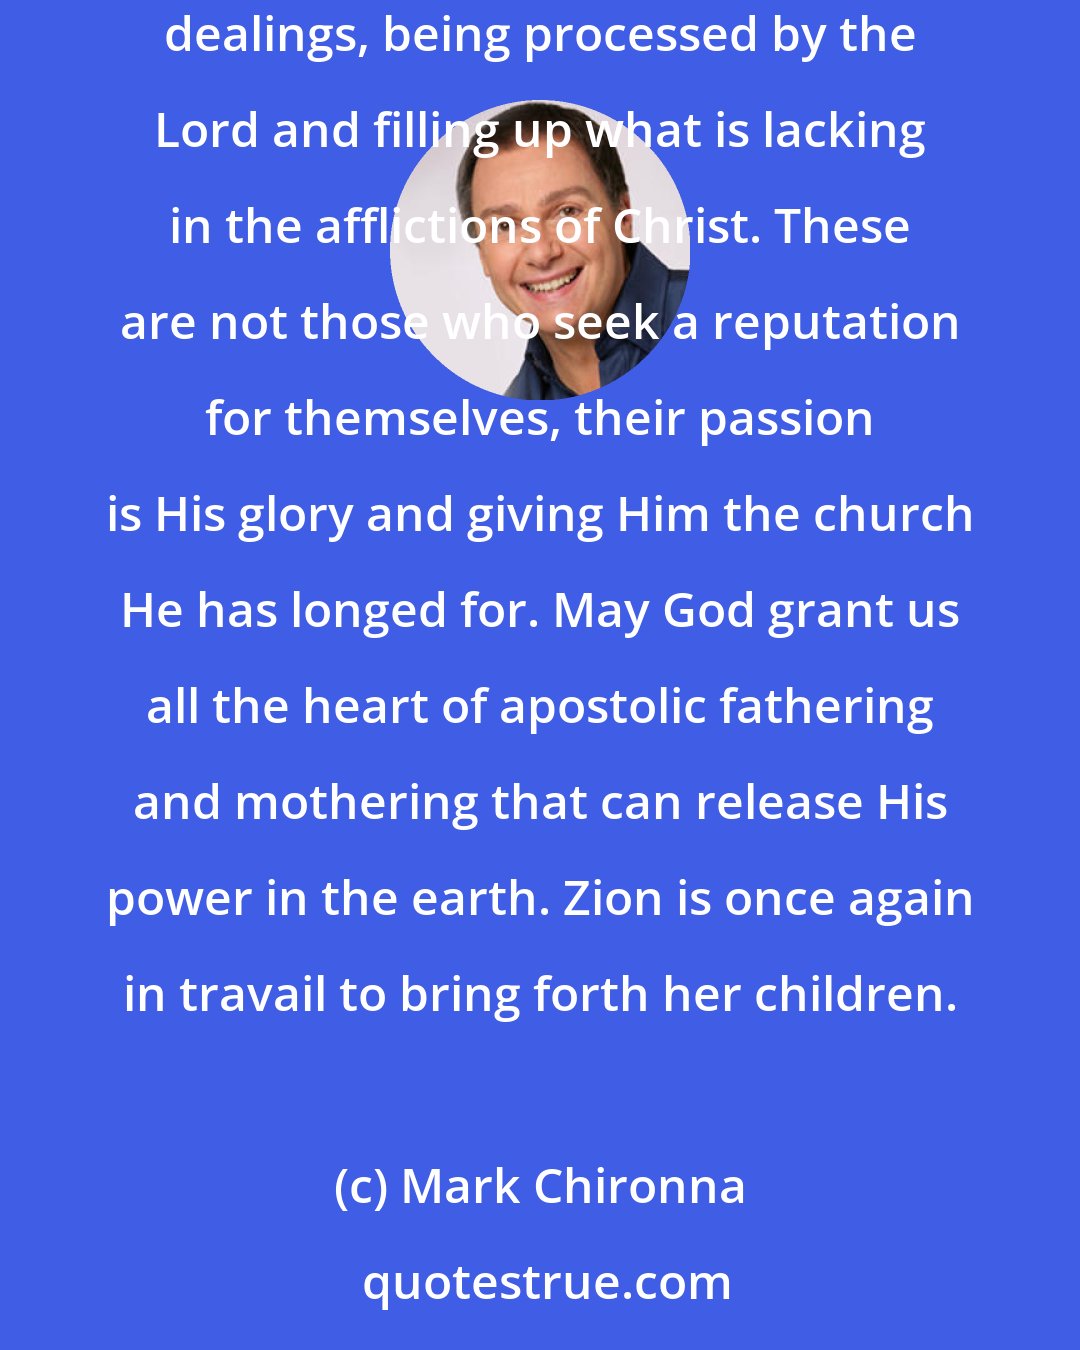 Mark Chironna: We are on the cusp of the emergence of a company of hidden men and women who with all faith and patience have been enduring great struggles and dealings, being processed by the Lord and filling up what is lacking in the afflictions of Christ. These are not those who seek a reputation for themselves, their passion is His glory and giving Him the church He has longed for. May God grant us all the heart of apostolic fathering and mothering that can release His power in the earth. Zion is once again in travail to bring forth her children.